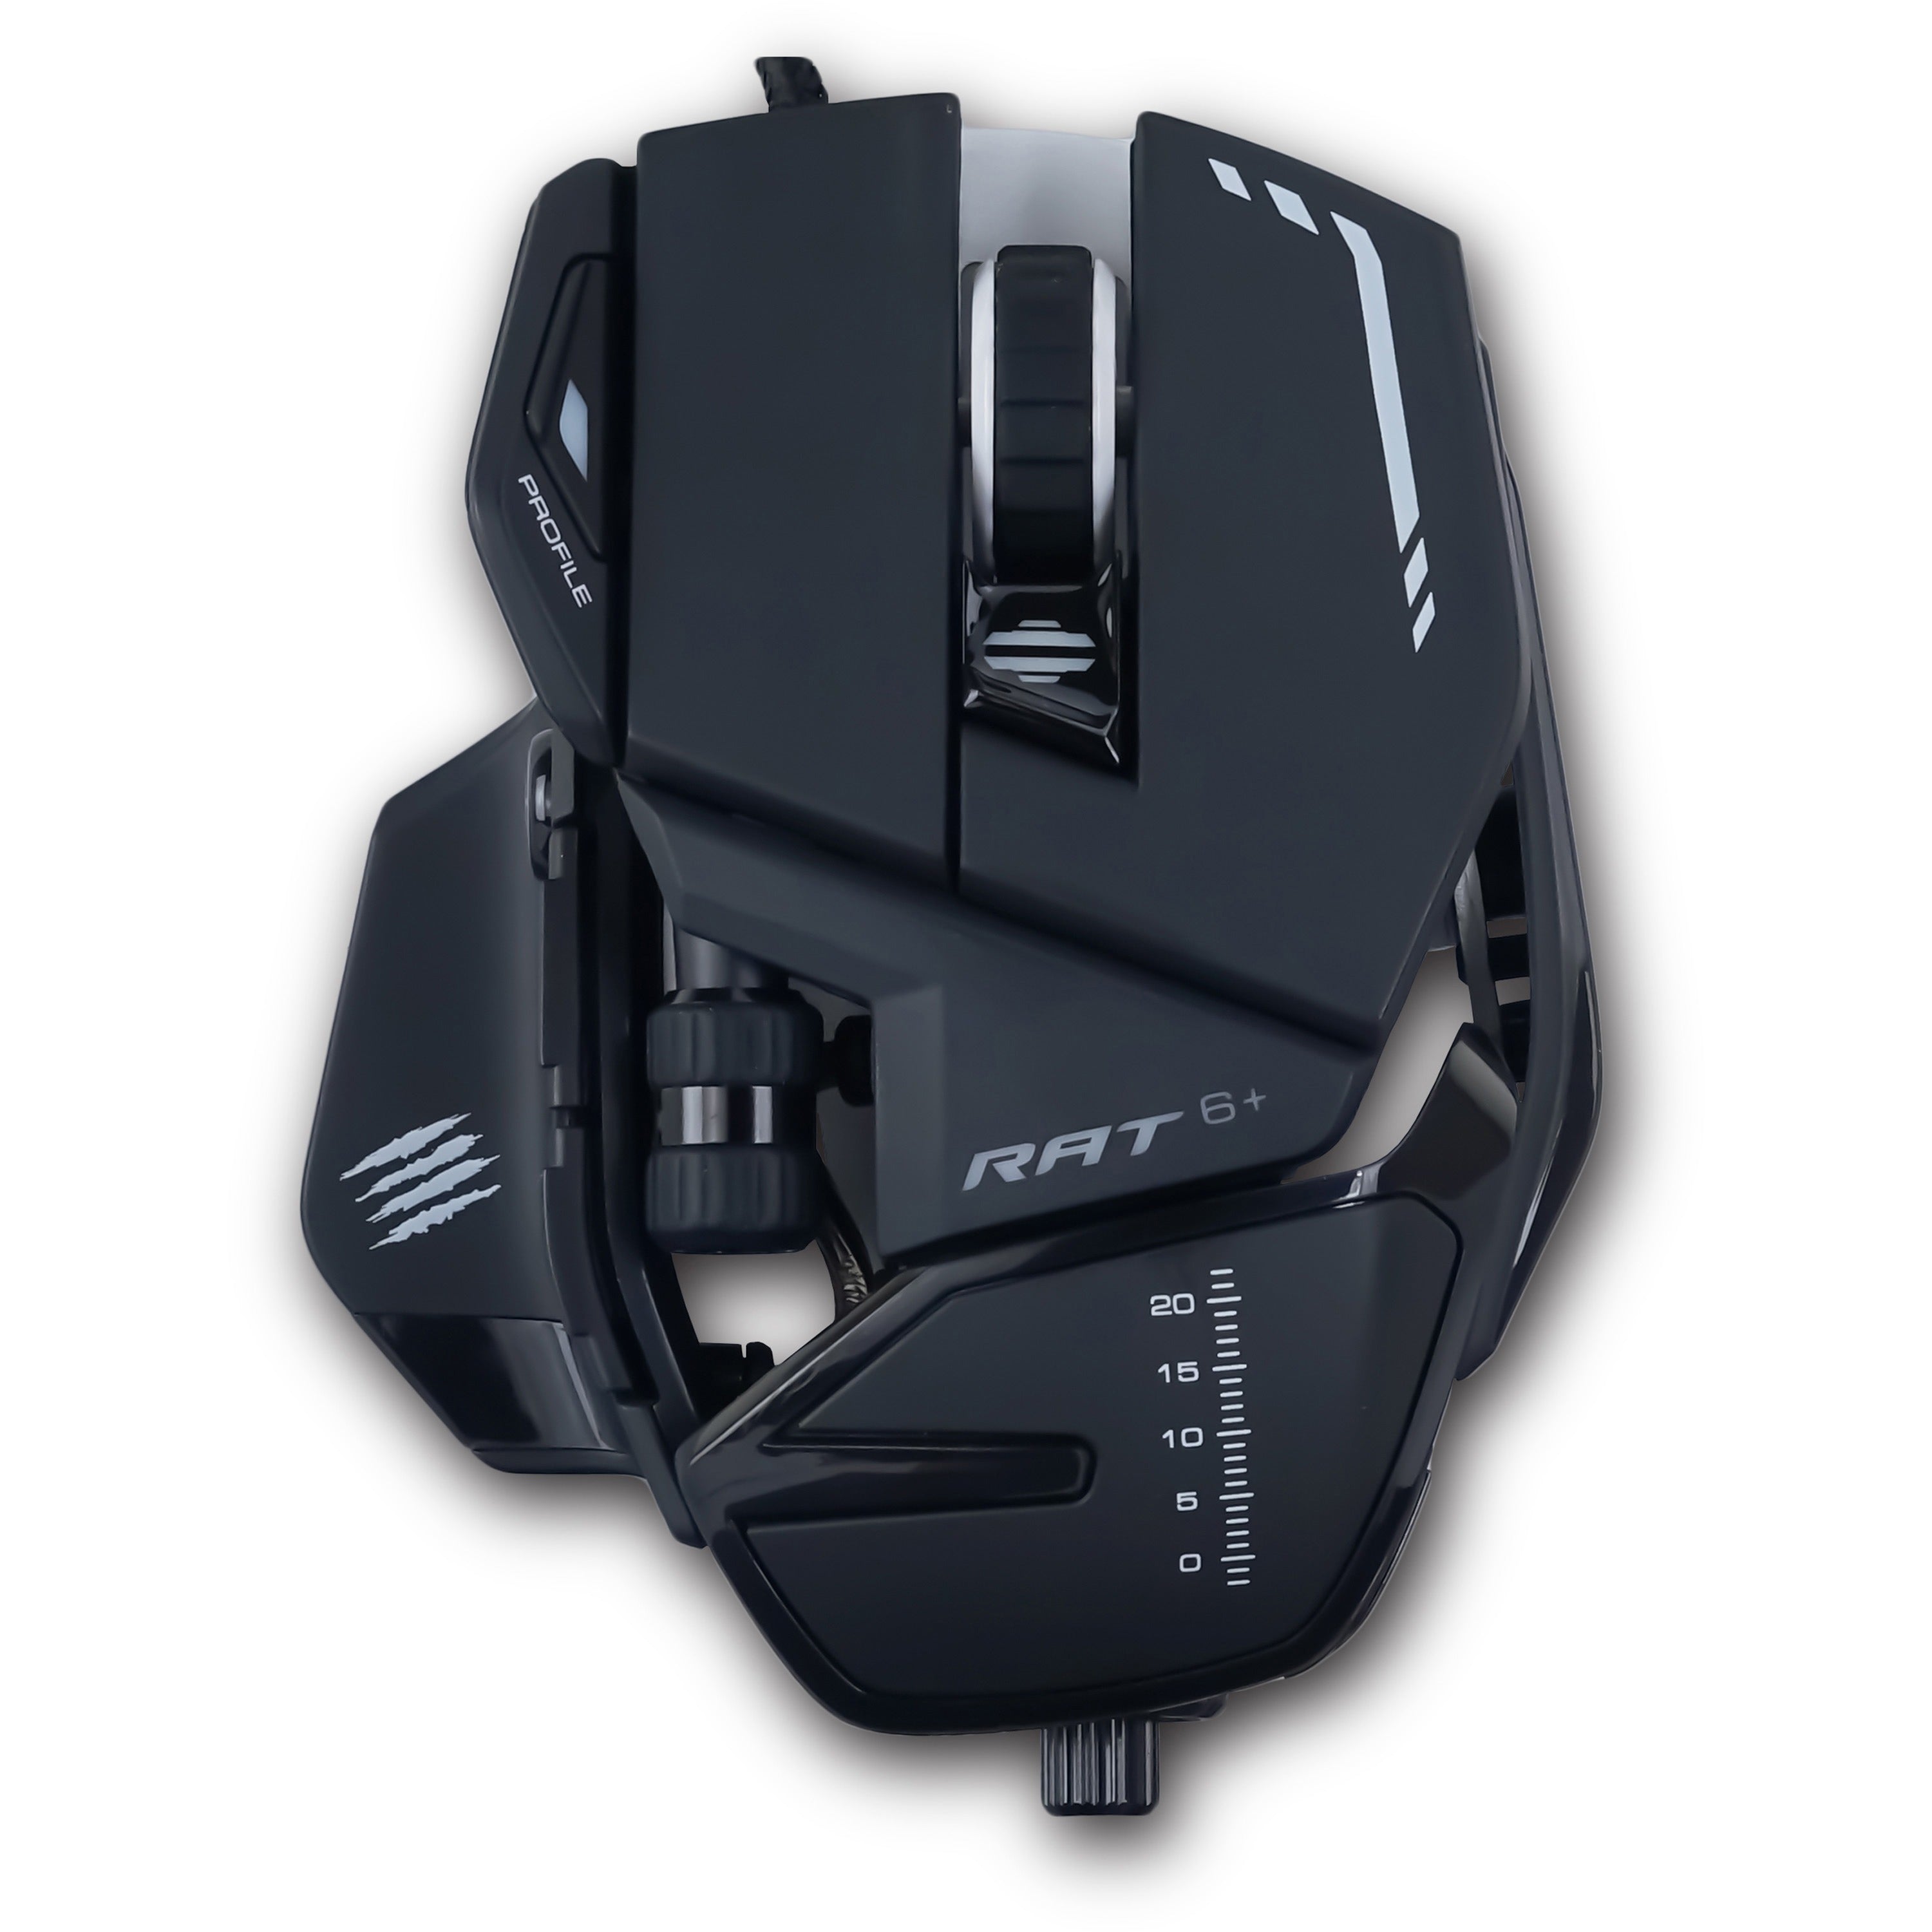 mad-catz-the-authentic-rat-6+-optical-gaming-mouse-pixart-pmw3360-cable-black-1-pack-usb-20-12000-dpi-11-buttons_mdcmr04dcambl00 - 7